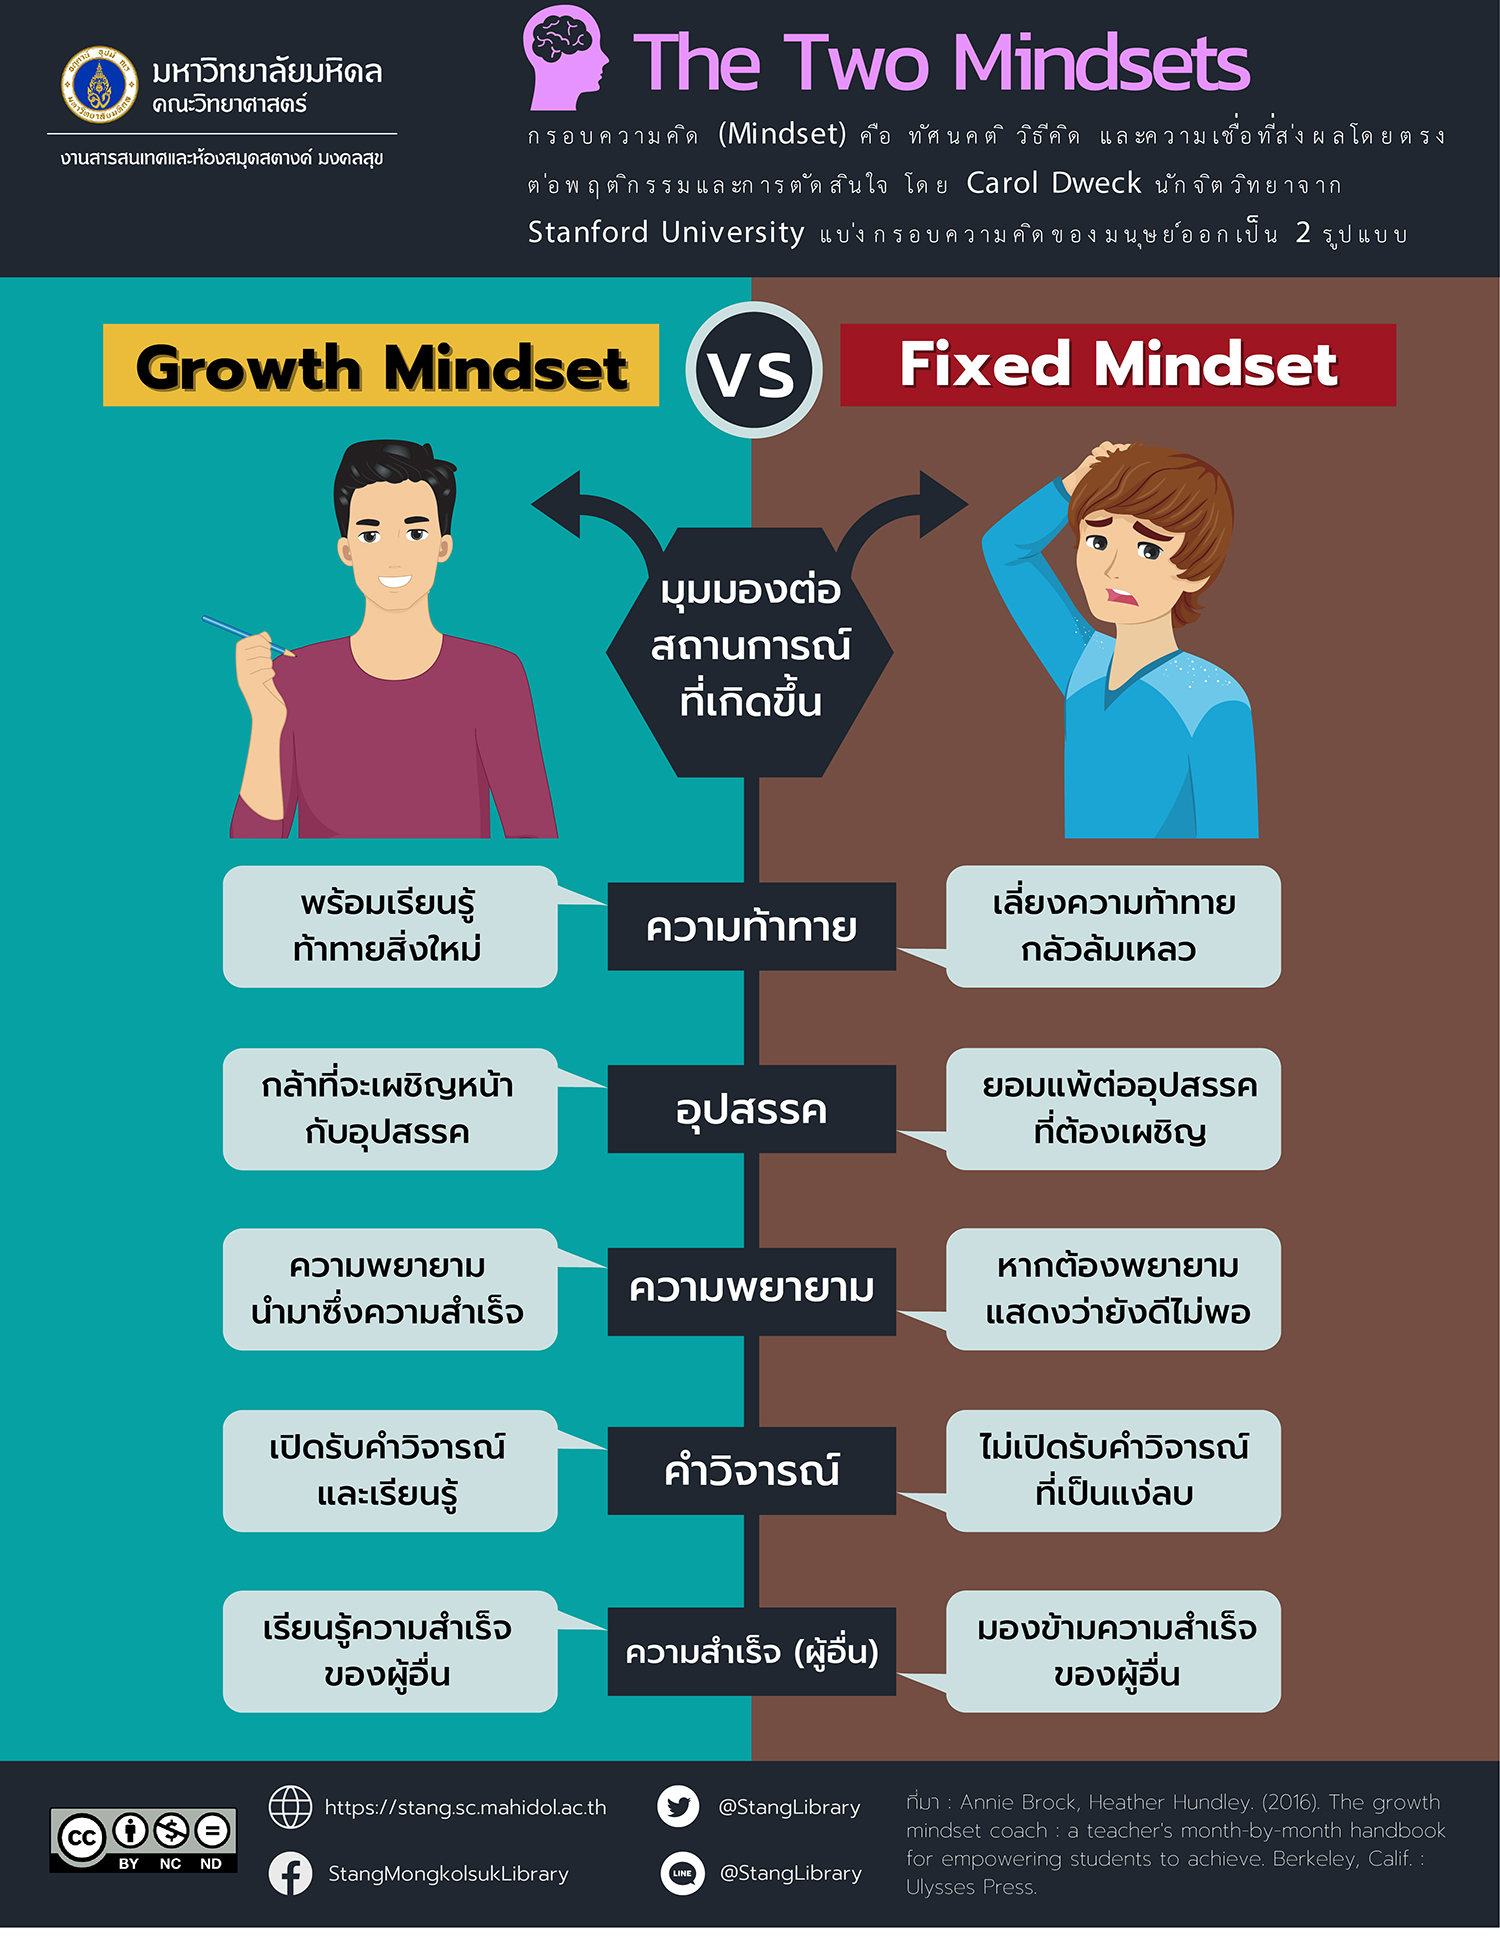 The Two Mindsets